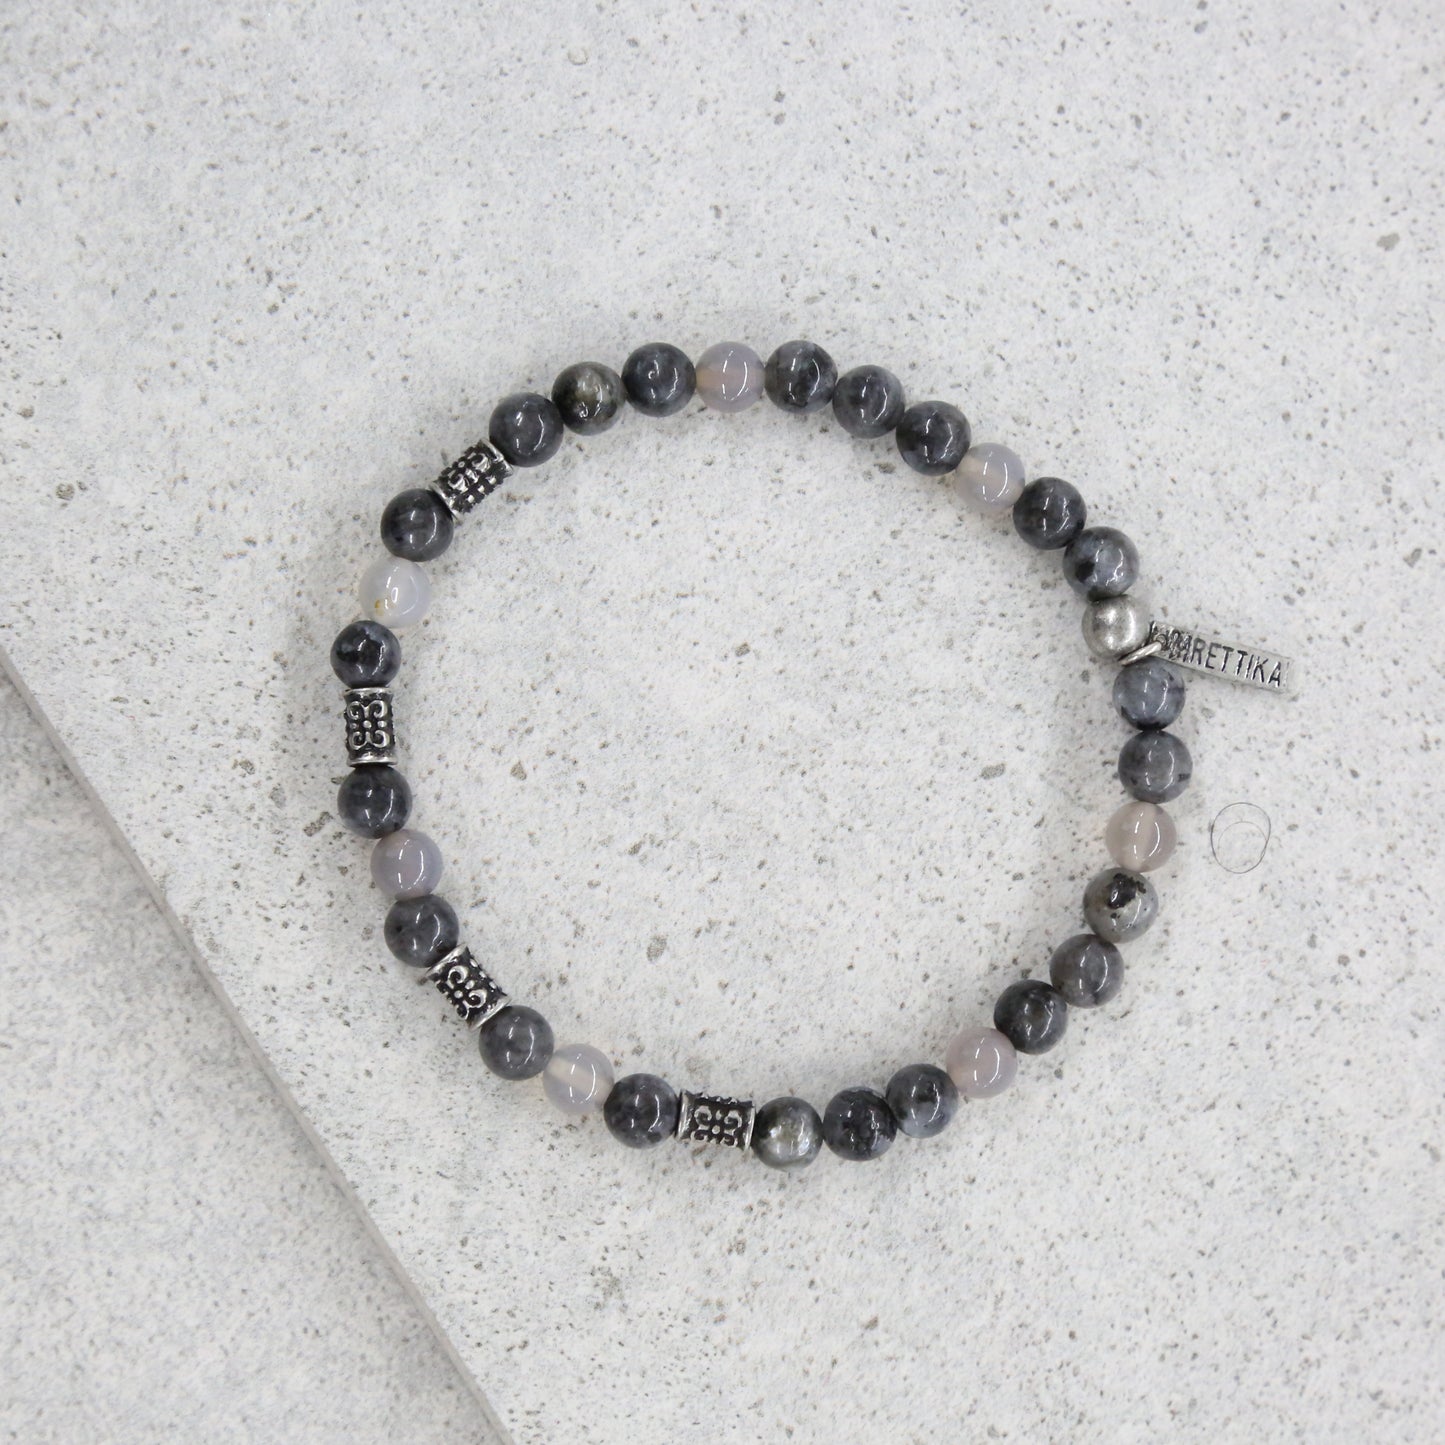 Grey Matter Bracelet in Grey and Silver Ox